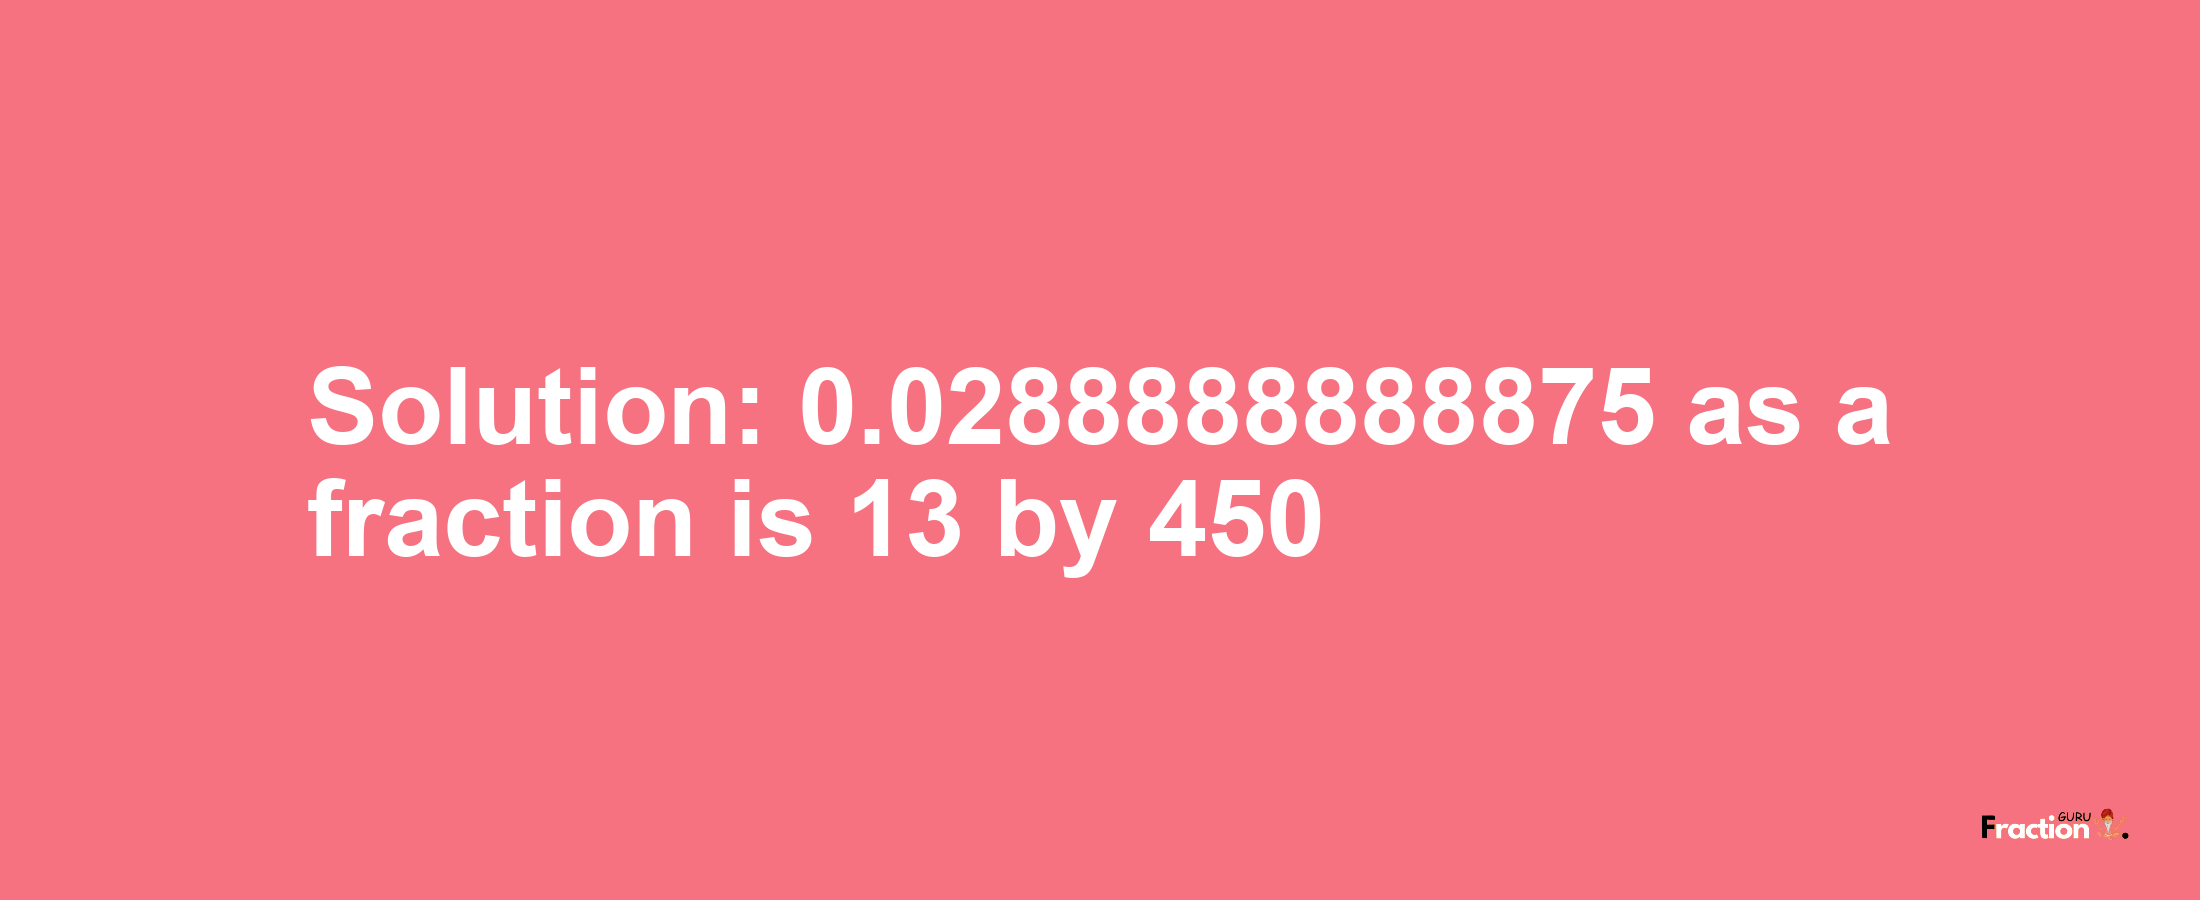 Solution:0.0288888888875 as a fraction is 13/450